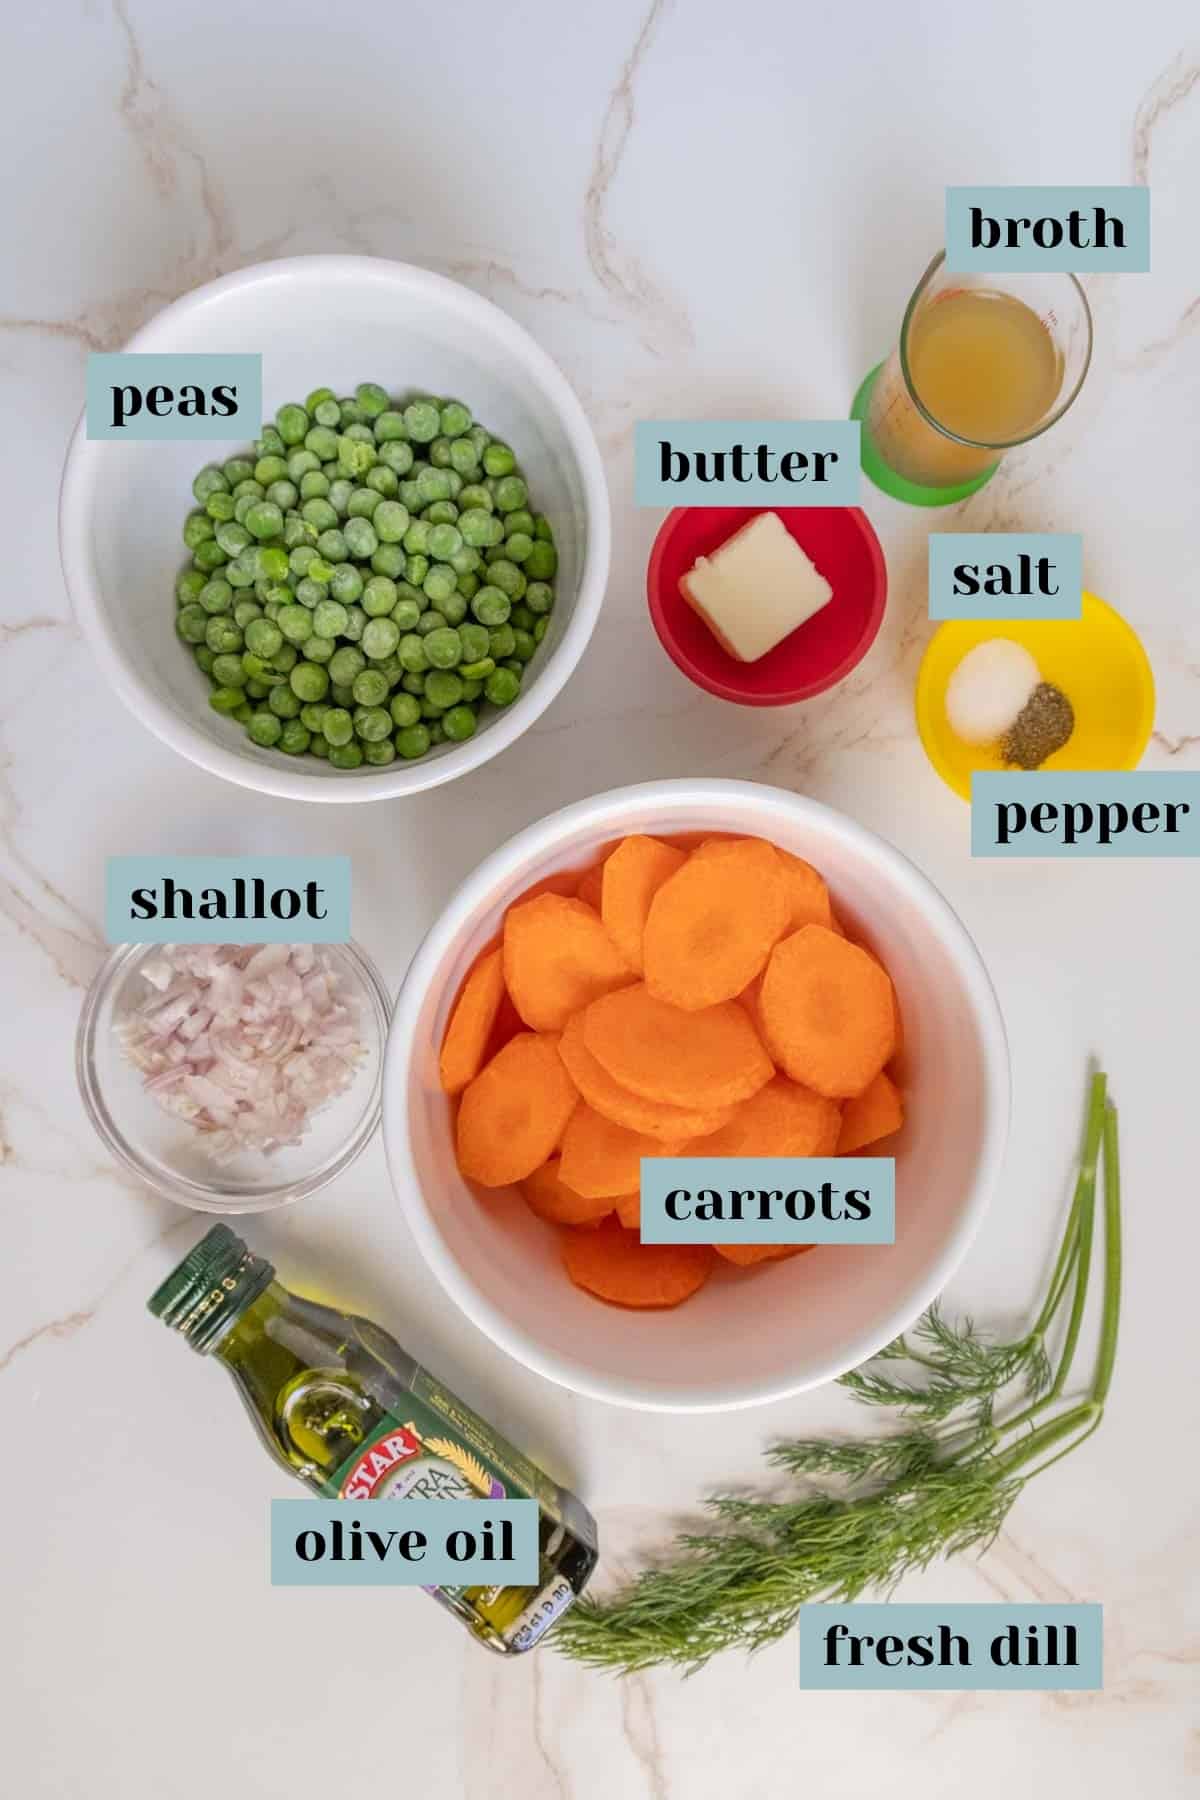 Assorted ingredients for cooking, labeled individually, laid out on a marble surface.